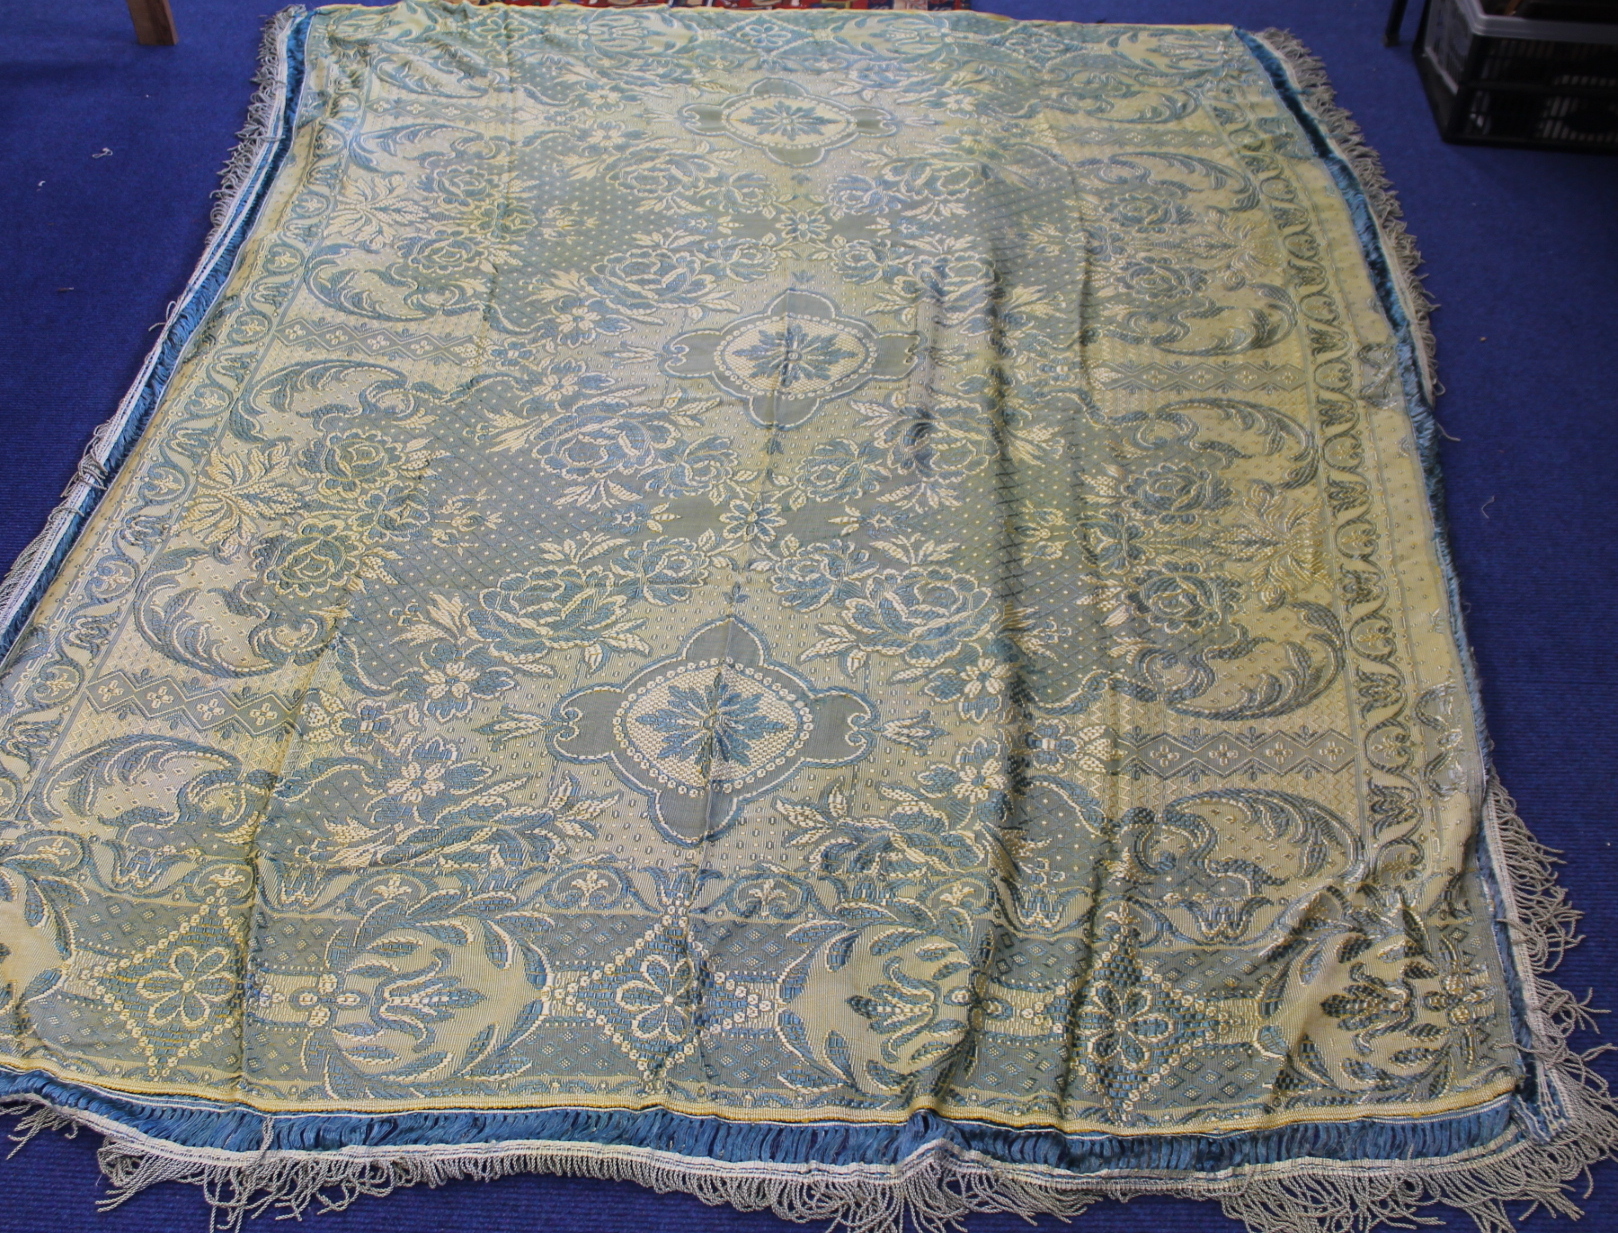 Early 20th century vintage floral woven bedspread in yellow and blue with fringed borders,